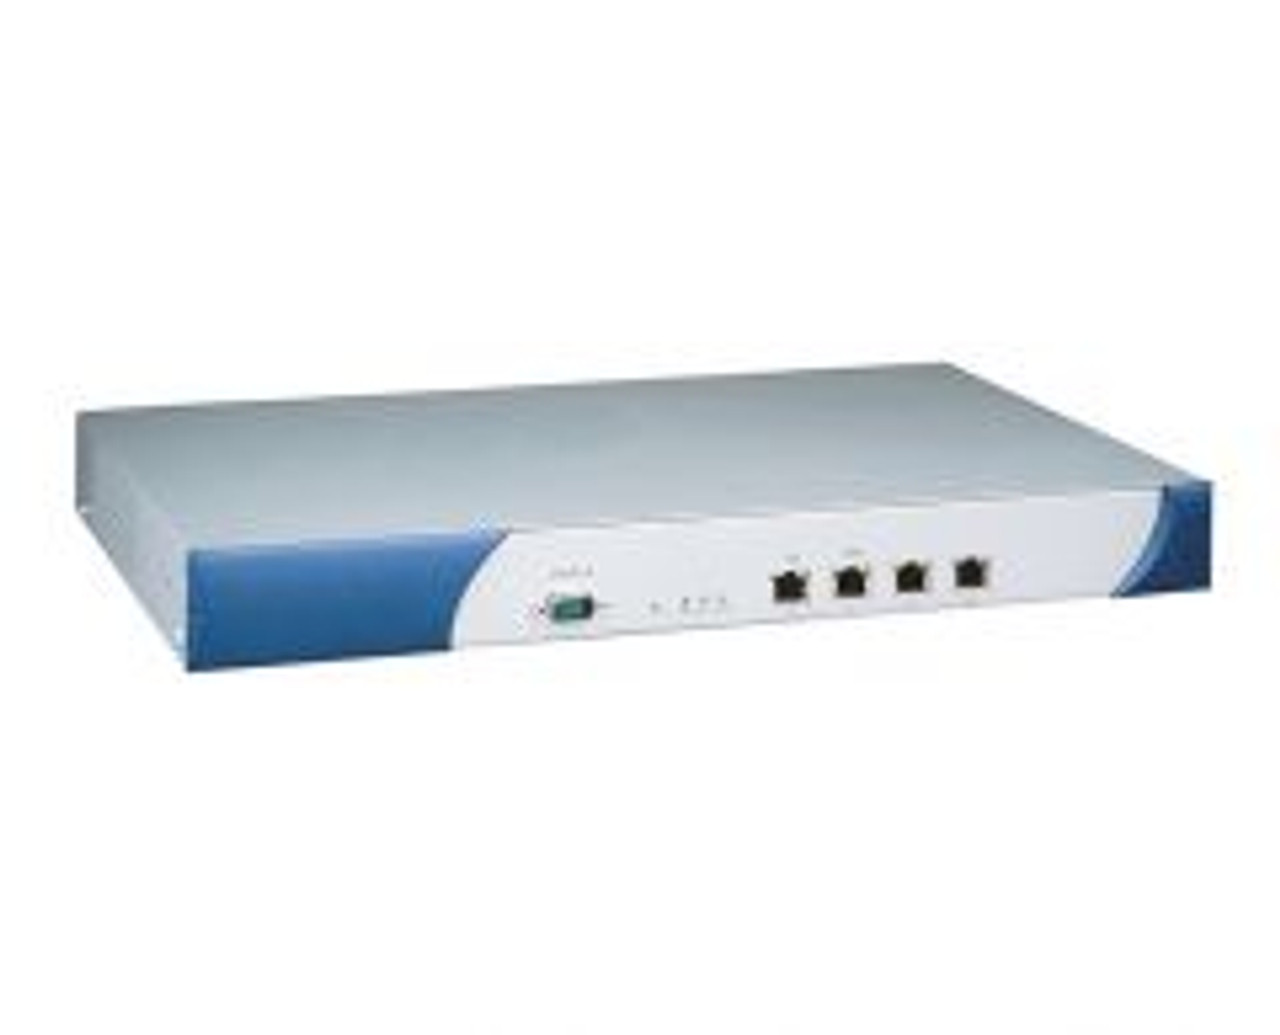 FPR2140-NGFW-K9 | Cisco | FirePOWER 2140 NGFW Appliance